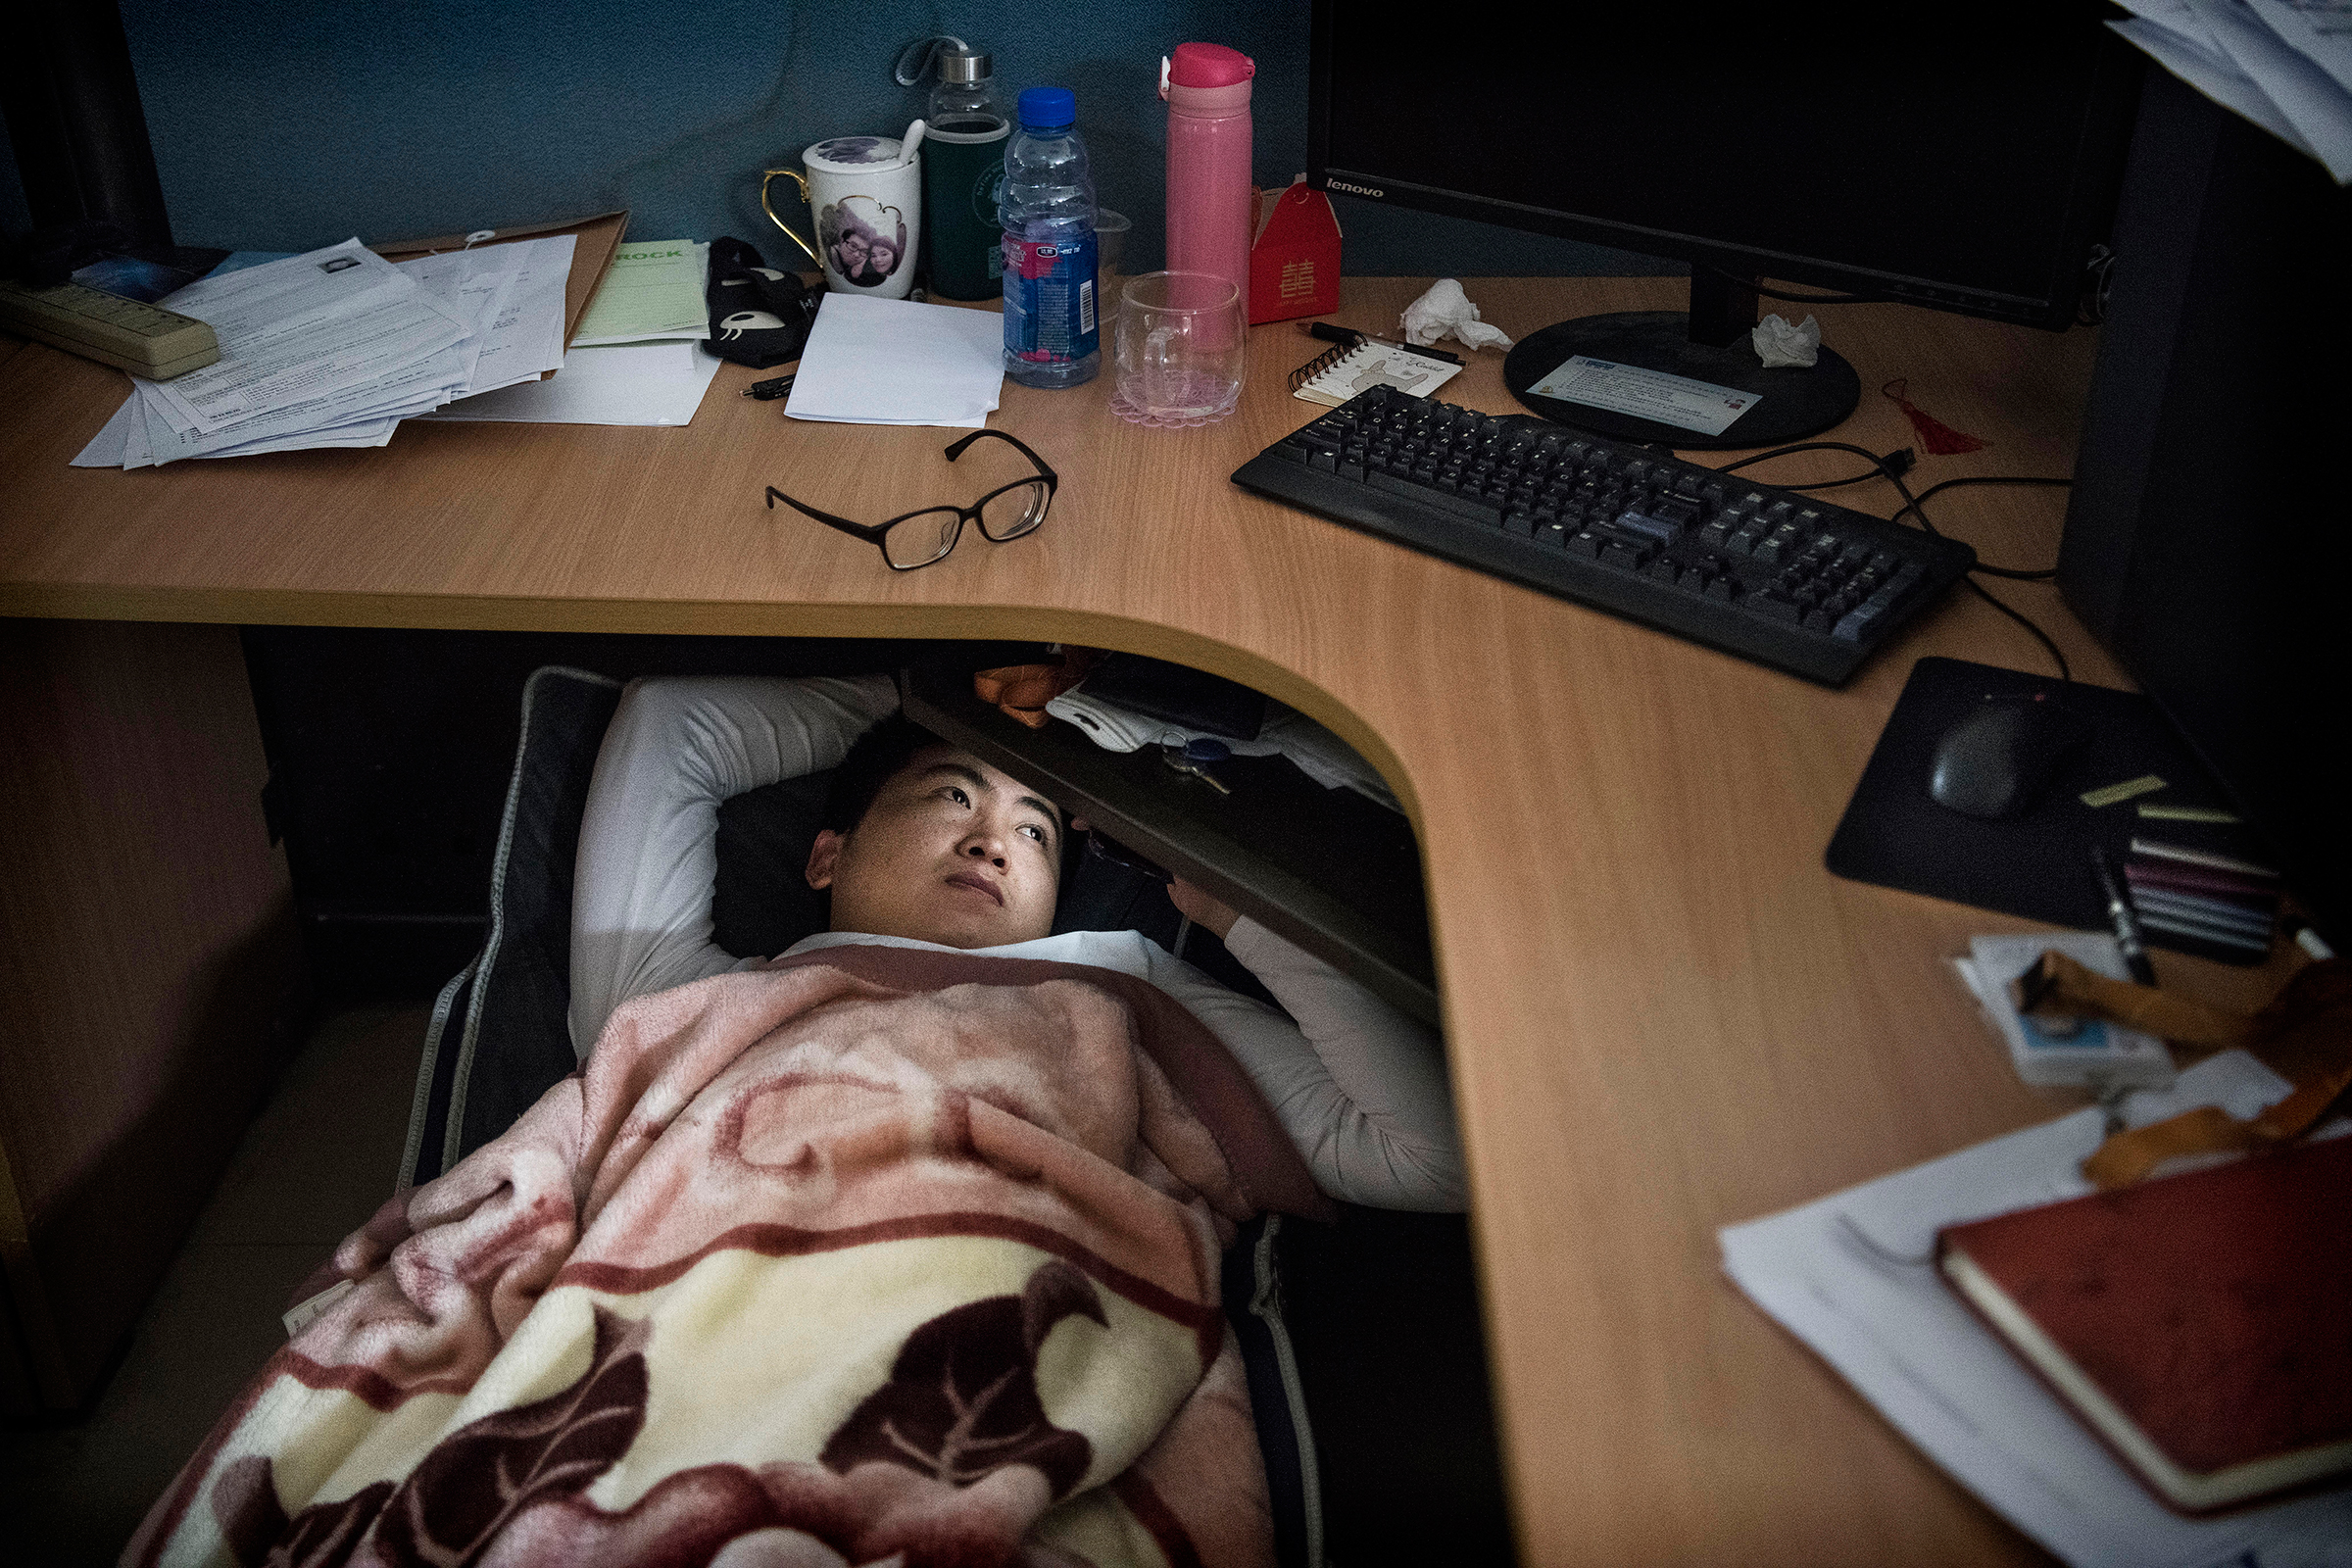 A Huawei employee watches a program on his smartphone as he rests at his cubicle during a lunch break at the research and development area in the Bantian campus in Shenzhen, China, on April 12, 2019. (Kevin Frayer—Getty Images)